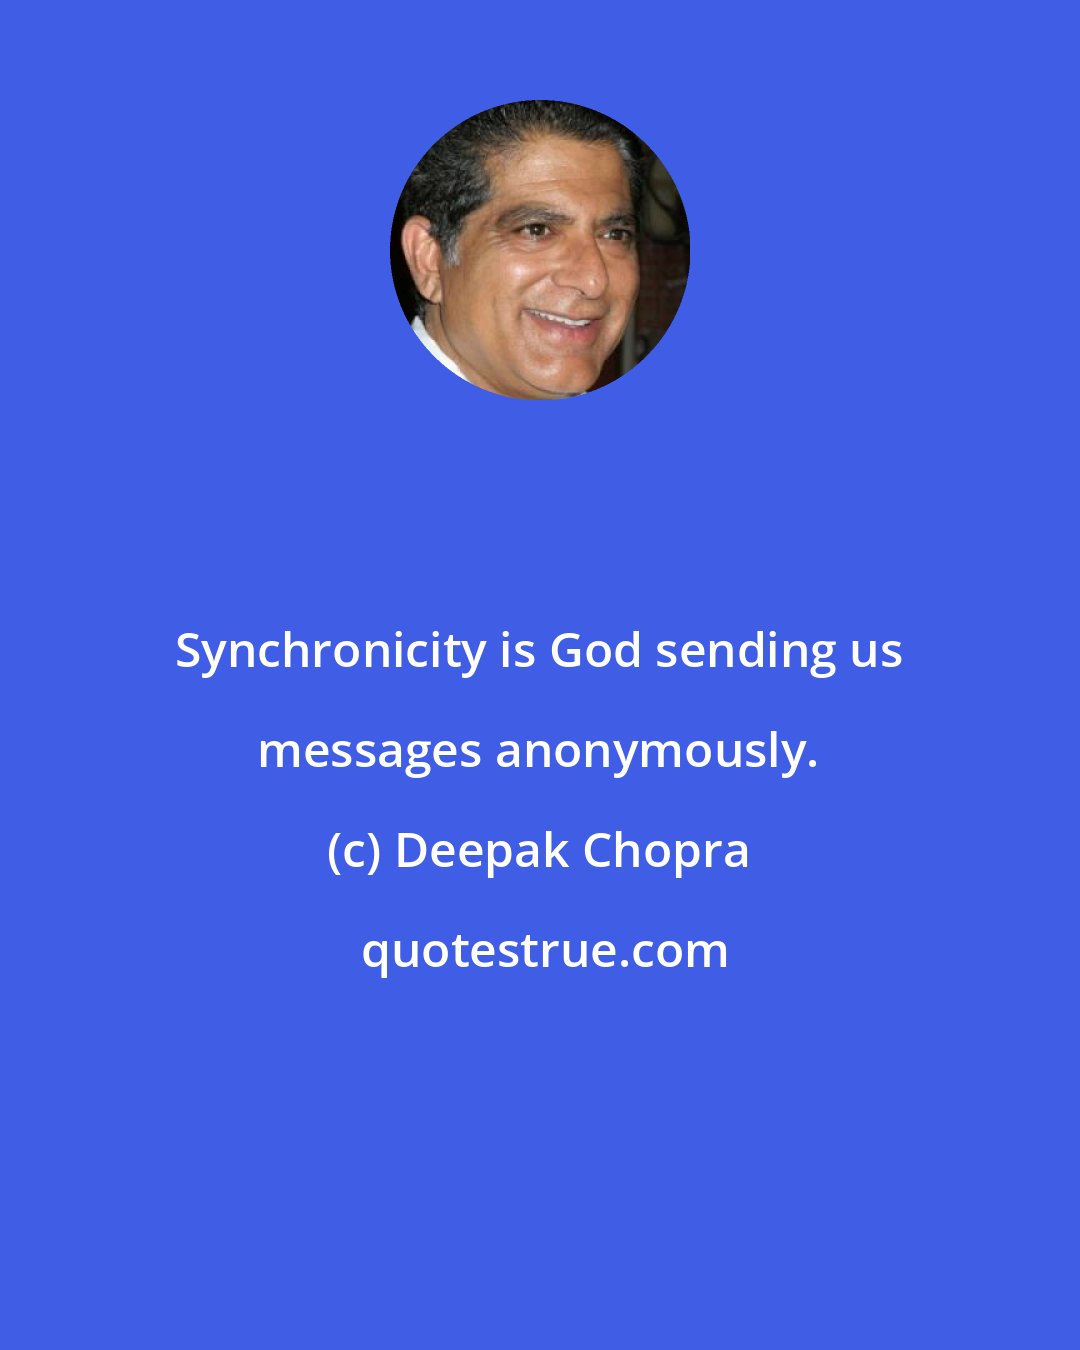 Deepak Chopra: Synchronicity is God sending us messages anonymously.